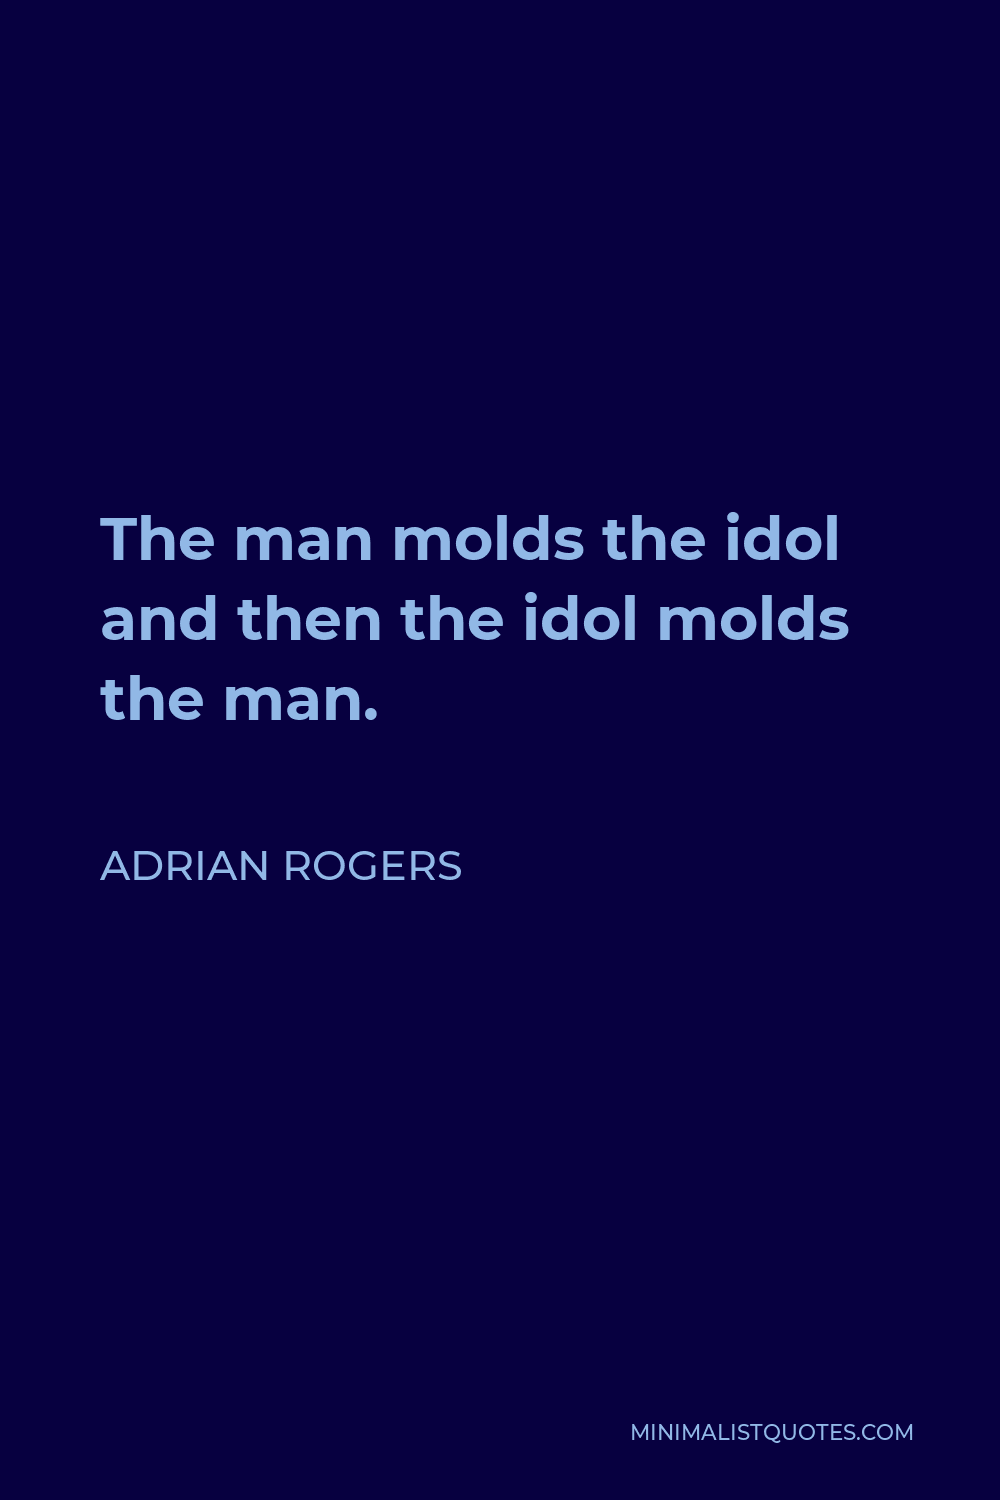 Adrian Rogers Quote - The man molds the idol and then the idol molds the man.